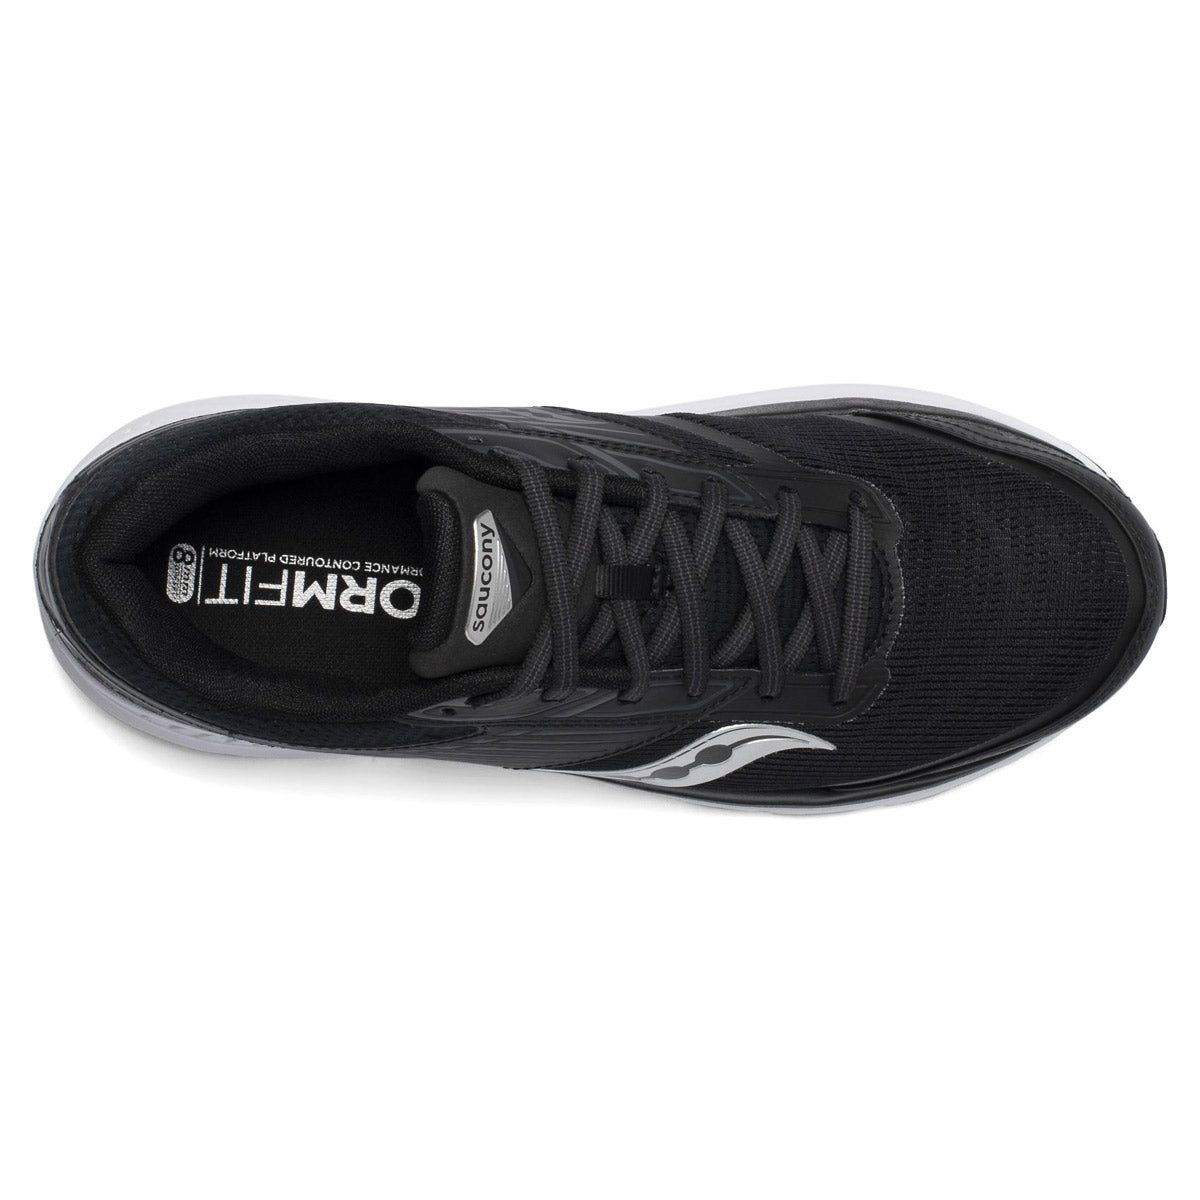 Top view of a single black Saucony Echelon 8 running shoe with white logo.